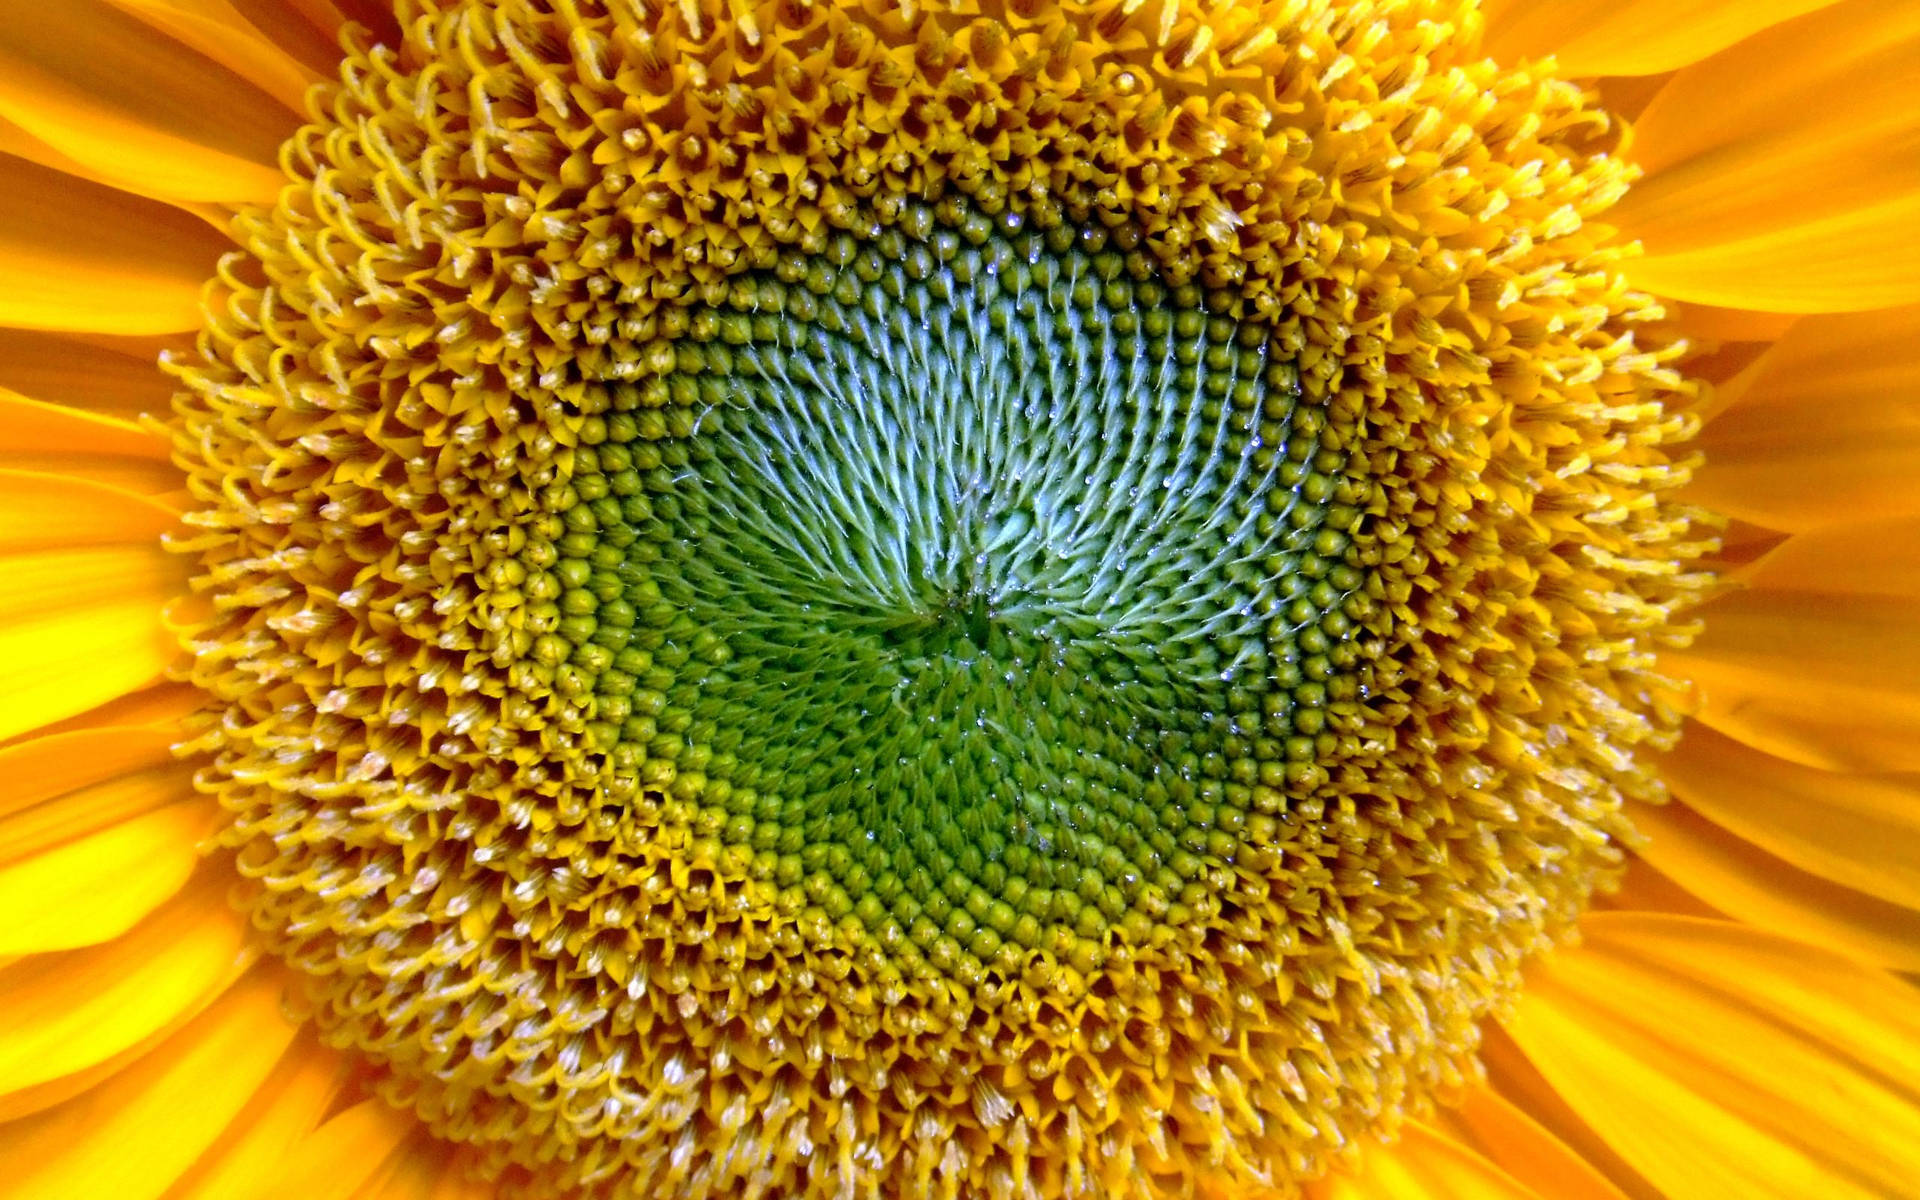 2560X1600 Sunflower Wallpaper and Background